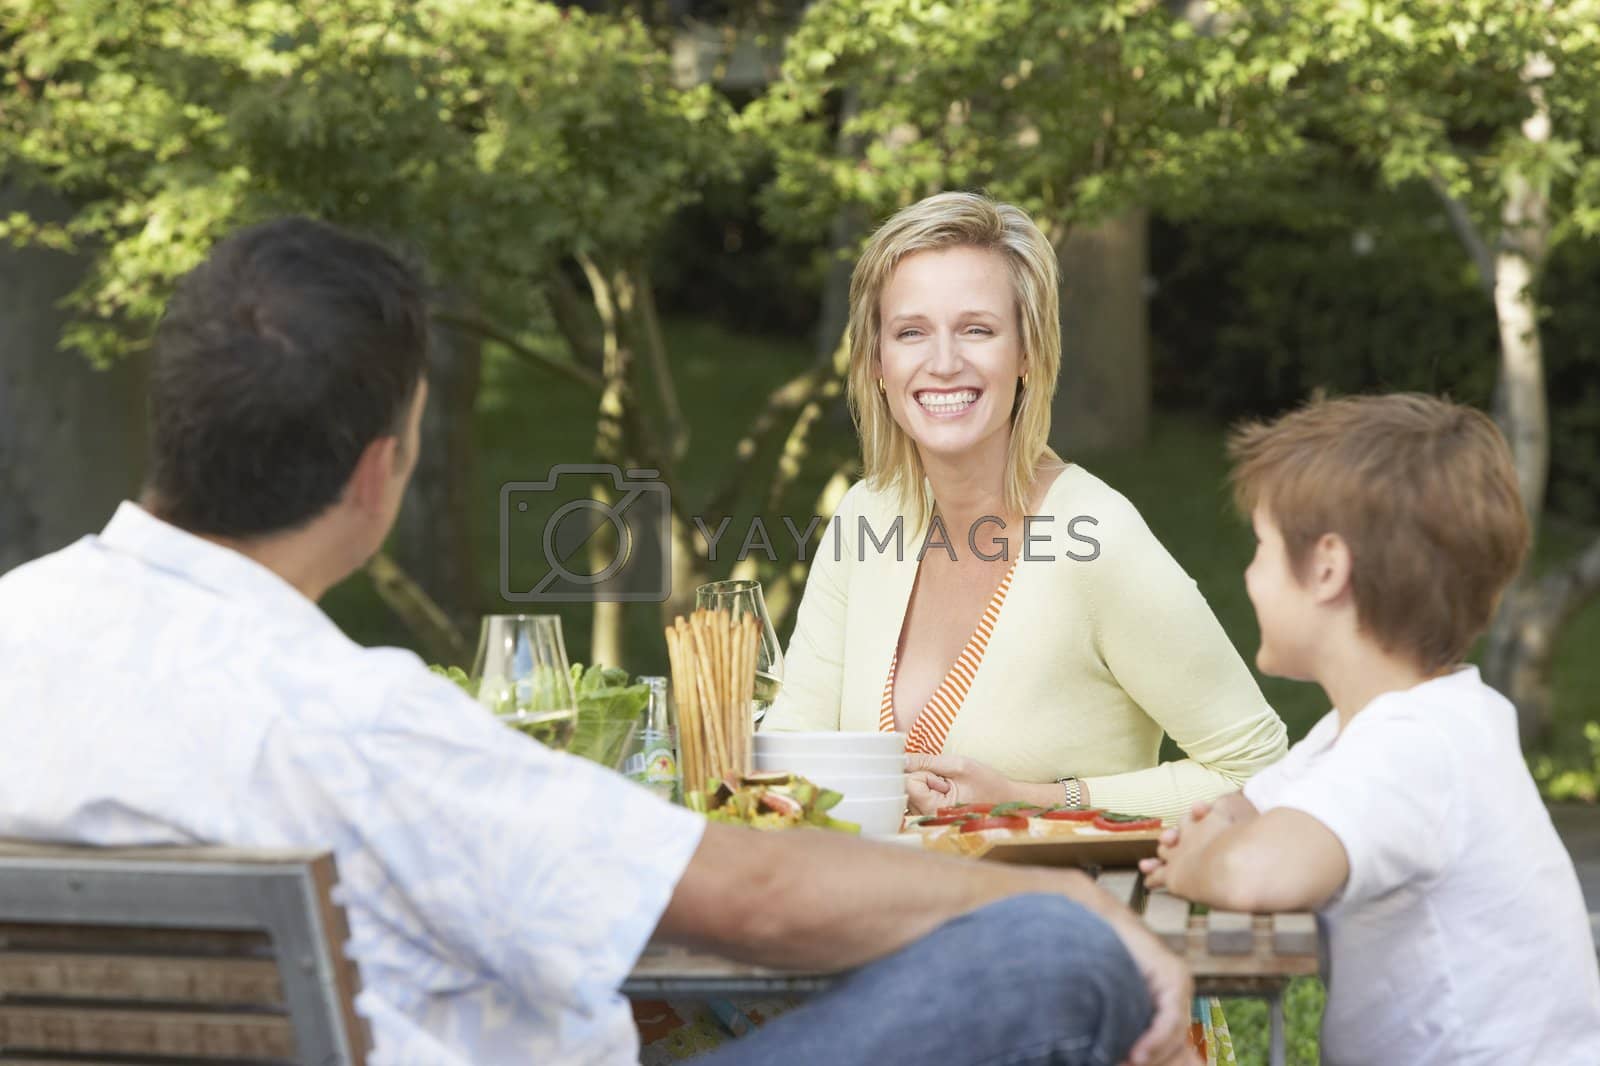 Royalty free image of Enjoying a Meal Outdoors by moodboard